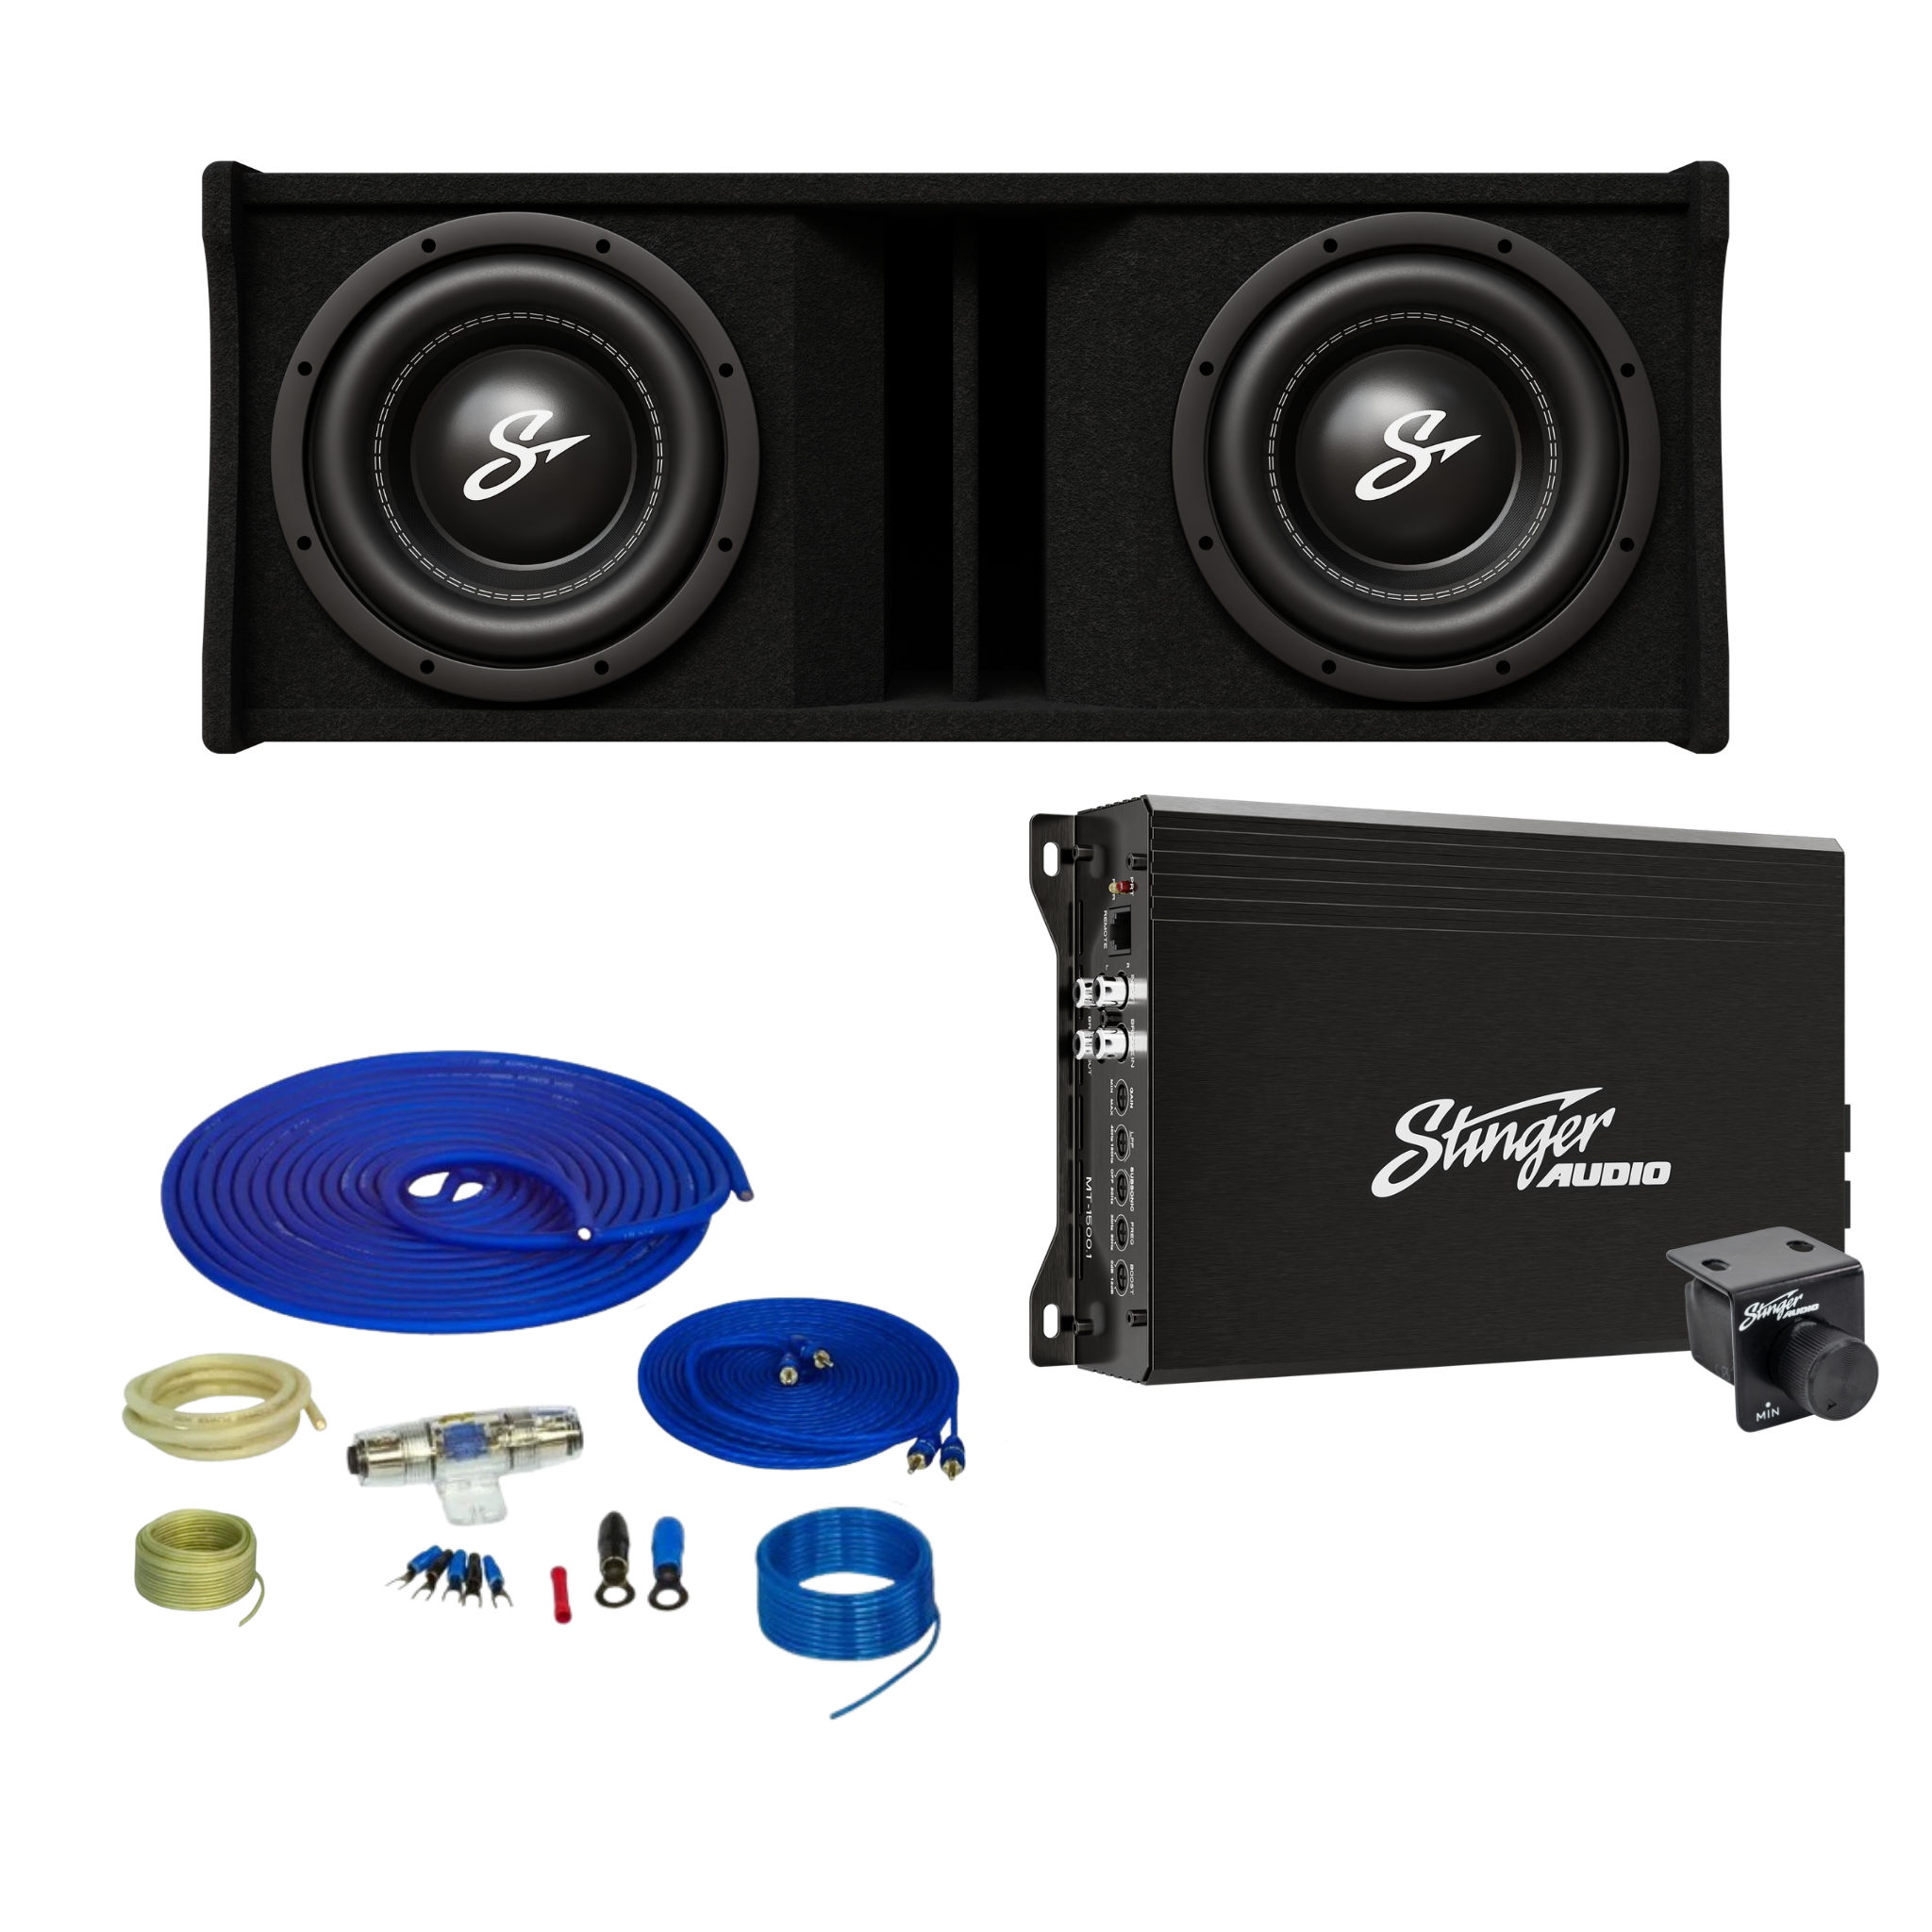 Stinger Off-Road Dual 12" 1,400 Watt (RMS) Loaded Ported Subwoofer Enclosure (1,400 Watts RMS / 2,400 Watts Max) Bass Package with Amplifier & Complete Wiring Kit